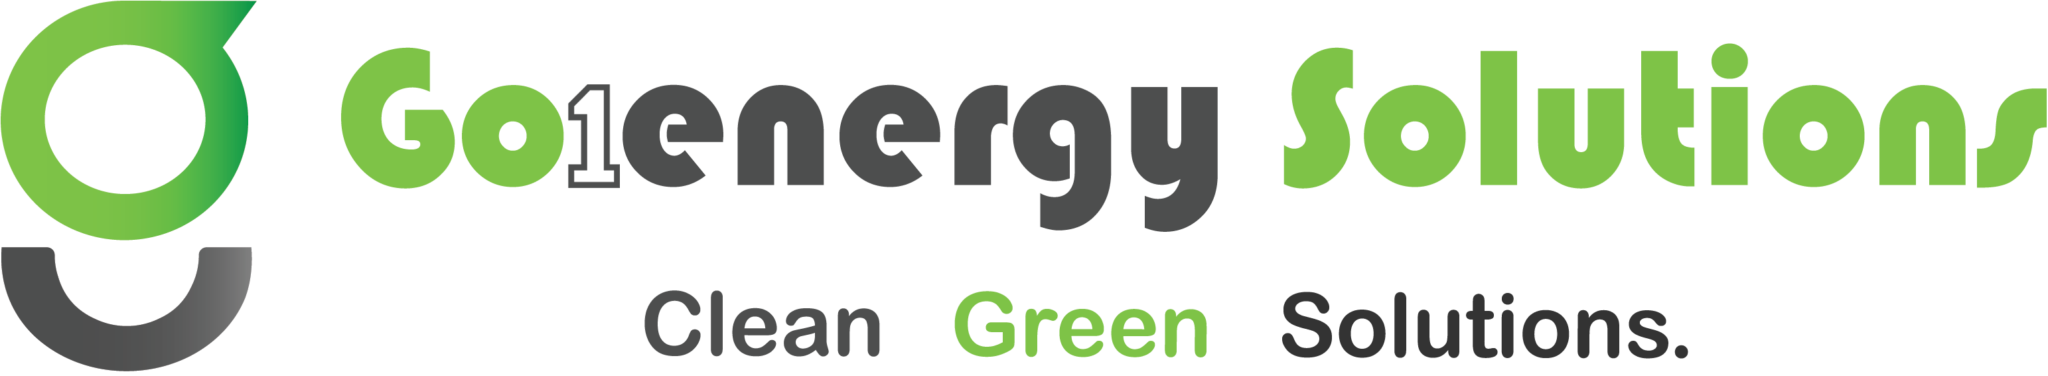 Get More Coupon Codes And Deals At Go1energy solutions